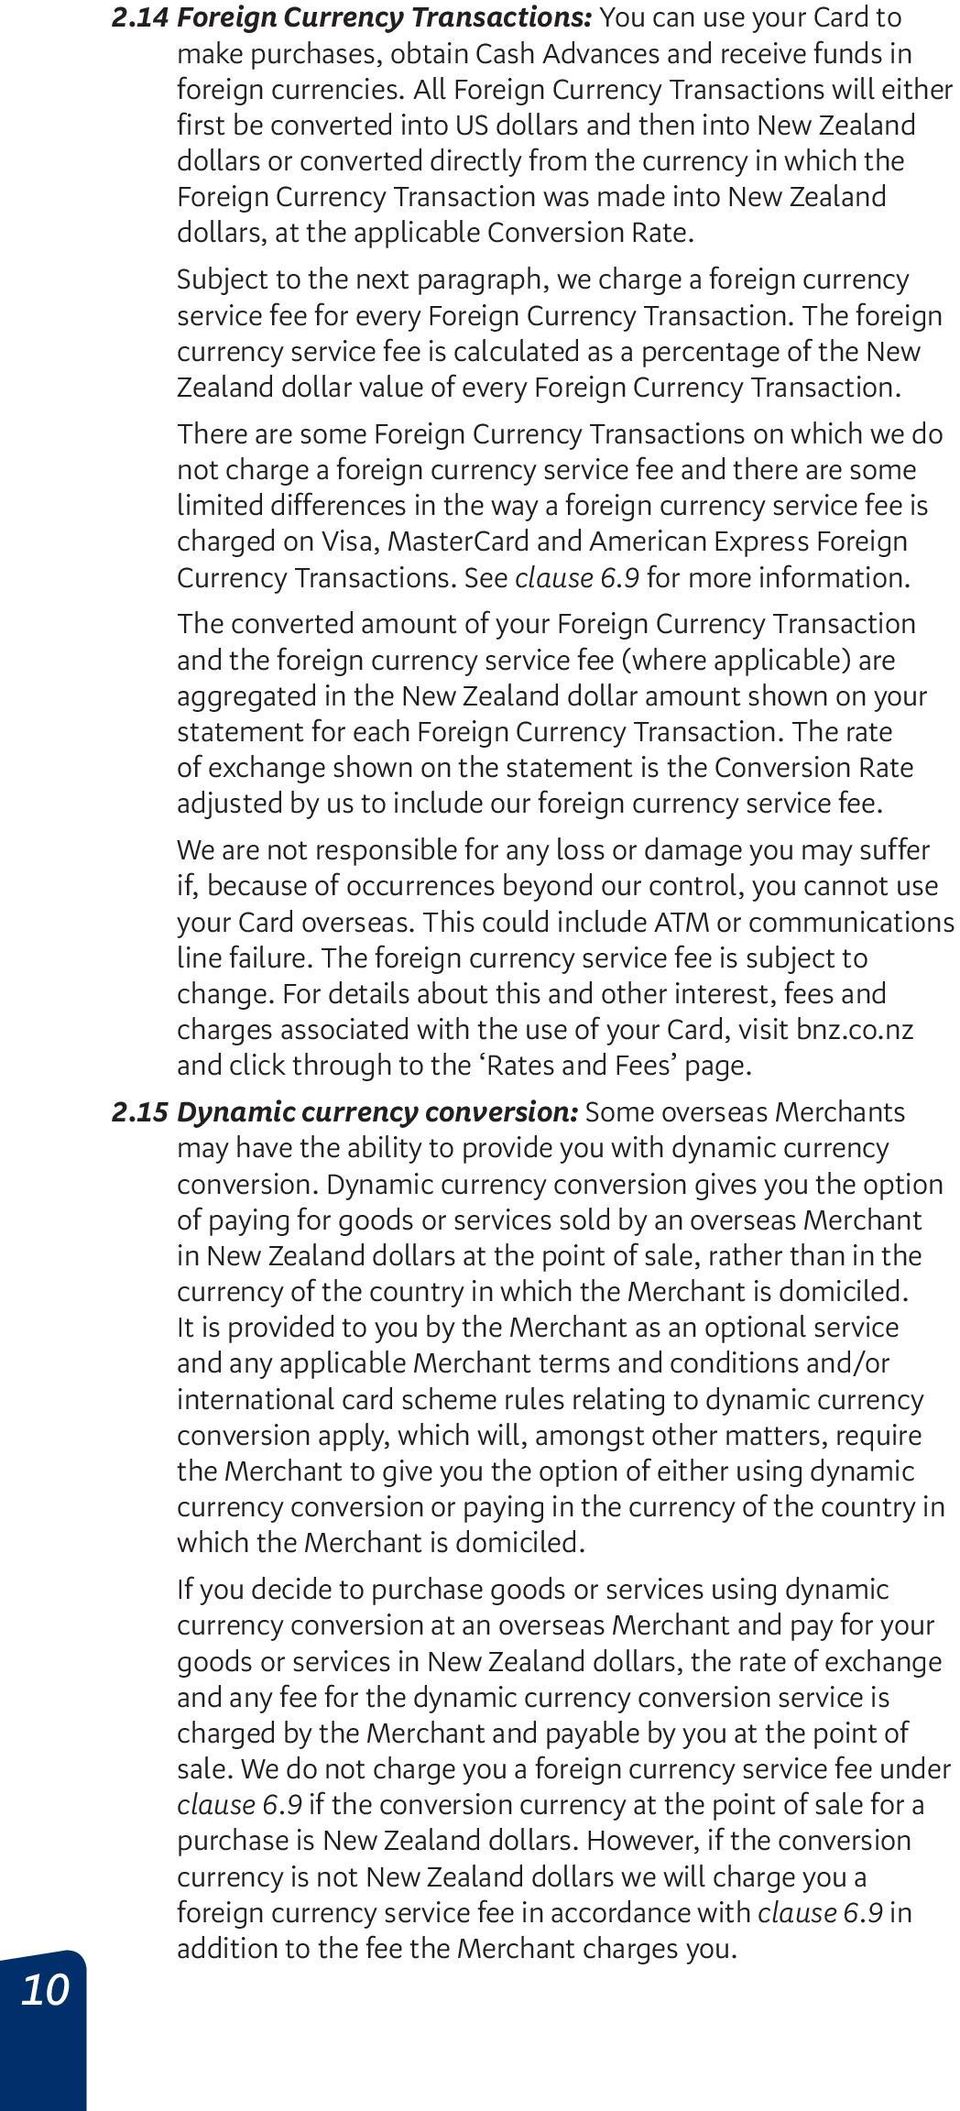 was made into New Zealand dollars, at the applicable Conversion Rate. Subject to the next paragraph, we charge a foreign currency service fee for every Foreign Currency Transaction.